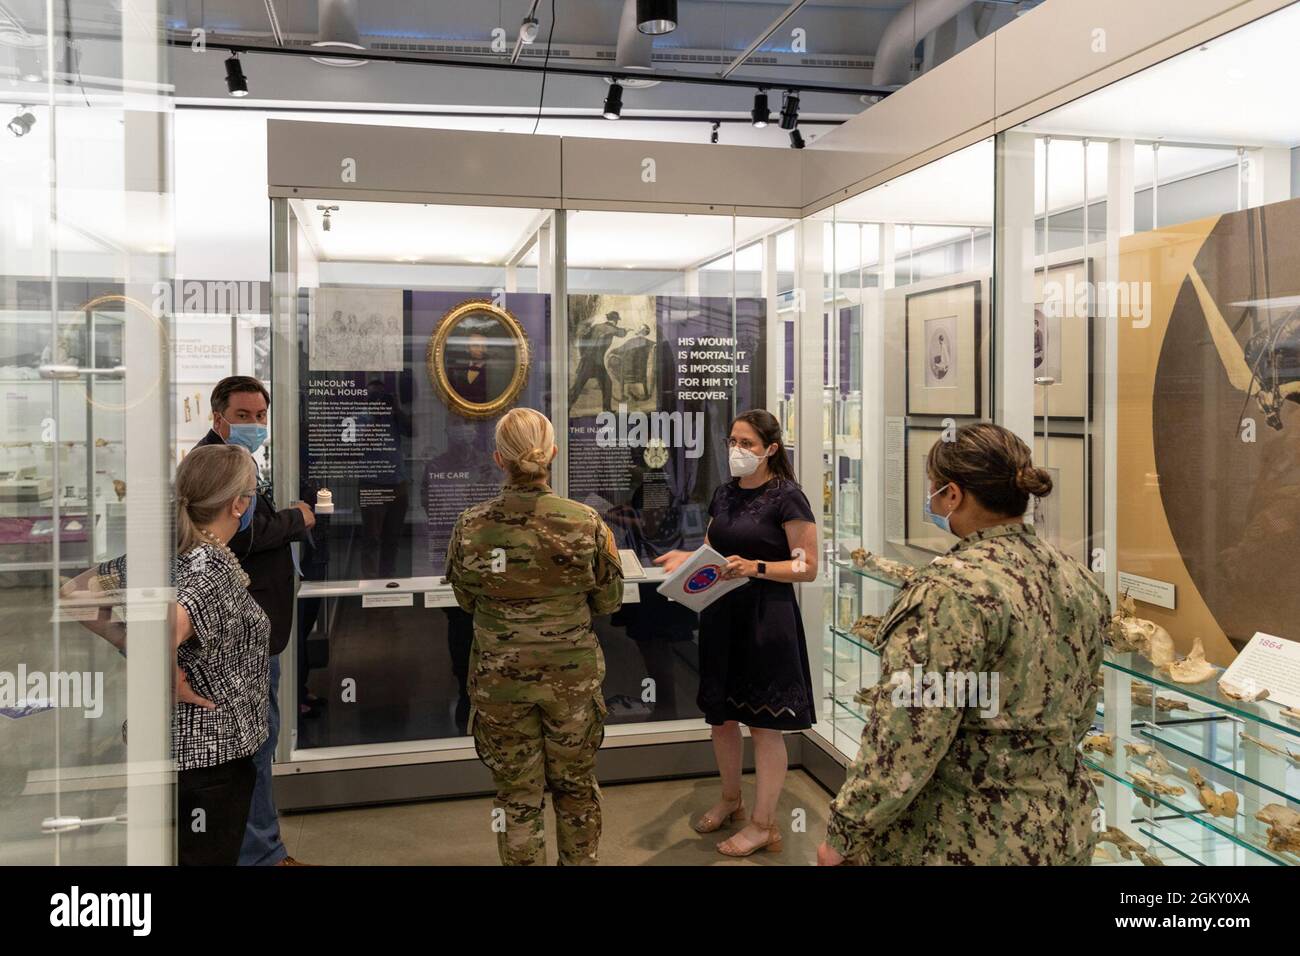 Description: Brig. Gen. Katherine Simonson 2021 Tour     Caption: Gwen Nelmes (second from right), Education Coordinator at the National Museum of Health and Medicine, provides a tour of the public galleries to Brig. Gen. Katherine Simonson, Deputy Assistant Director,  Research and Development Directorate, Defense Health Agency, and her staff on July 22, 2021, at the museum in Silver Spring, Maryland. (Disclosure: This image has been cropped to emphasize the subject.) Stock Photo